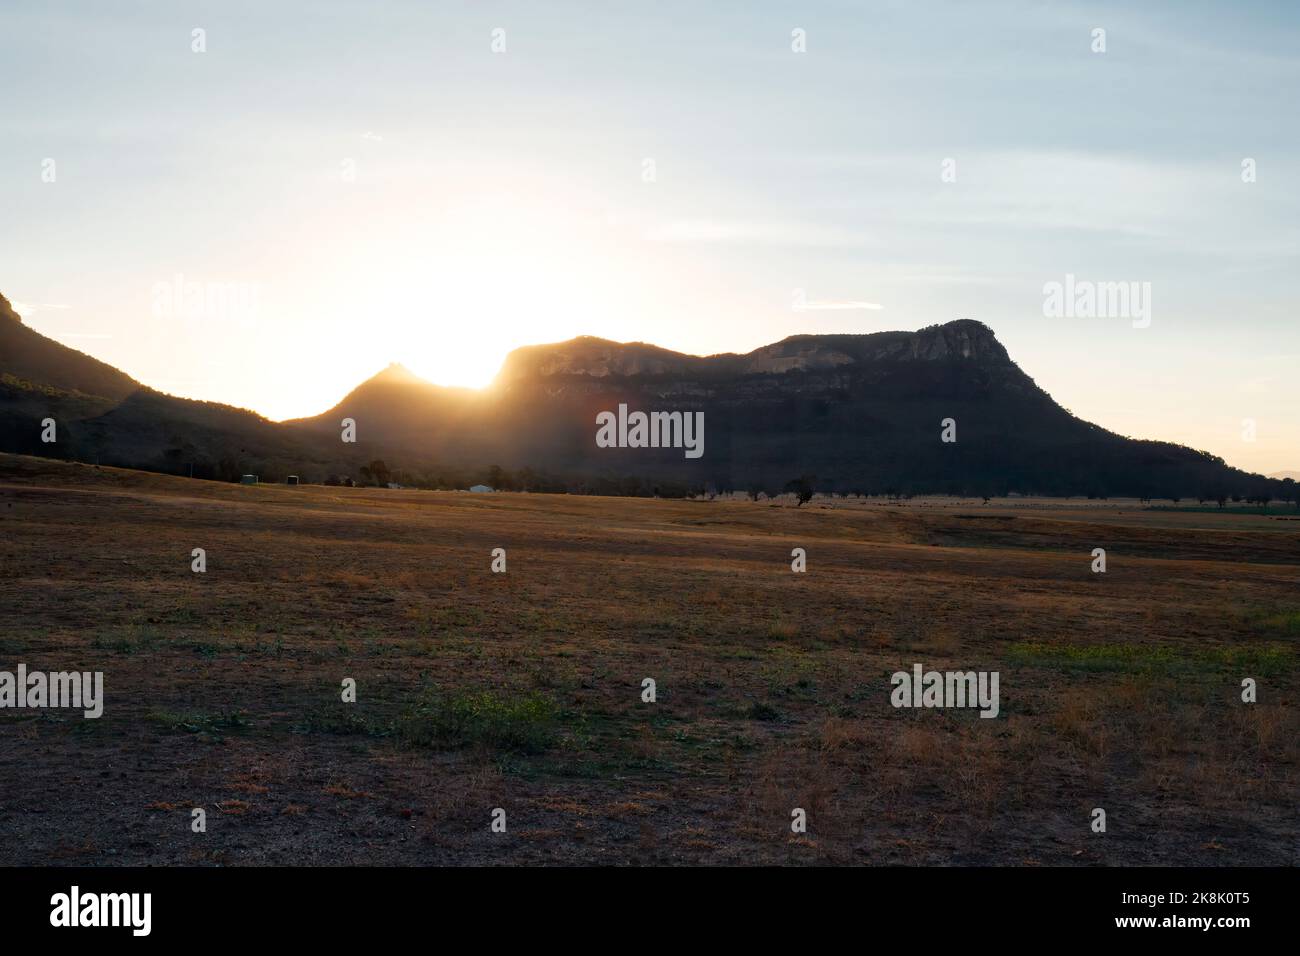 Sunset sunbeams sunburst as they hit the mountain edge in the Capertee Valley. in rural outback Australia Stock Photo